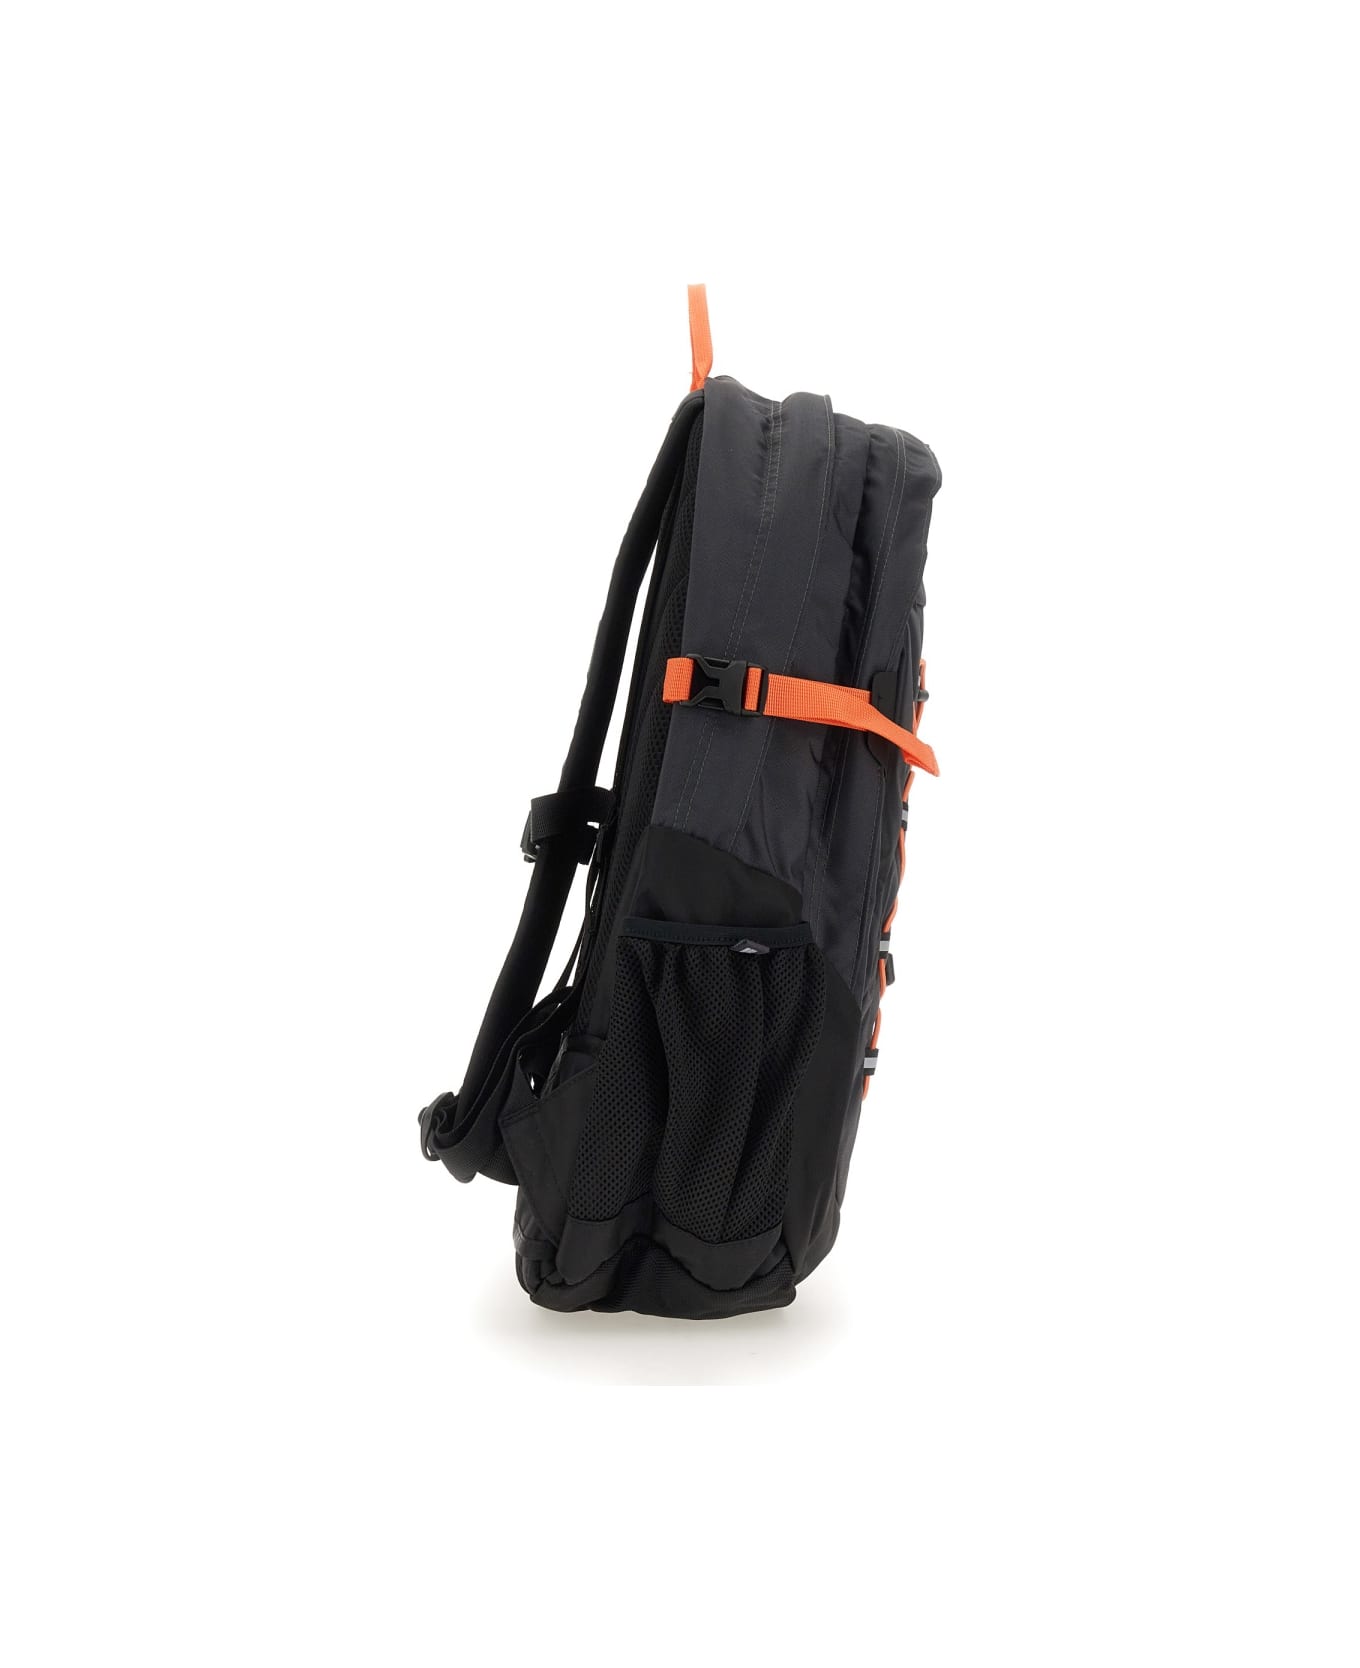 The North Face Borealis Classic Backpack バックパック